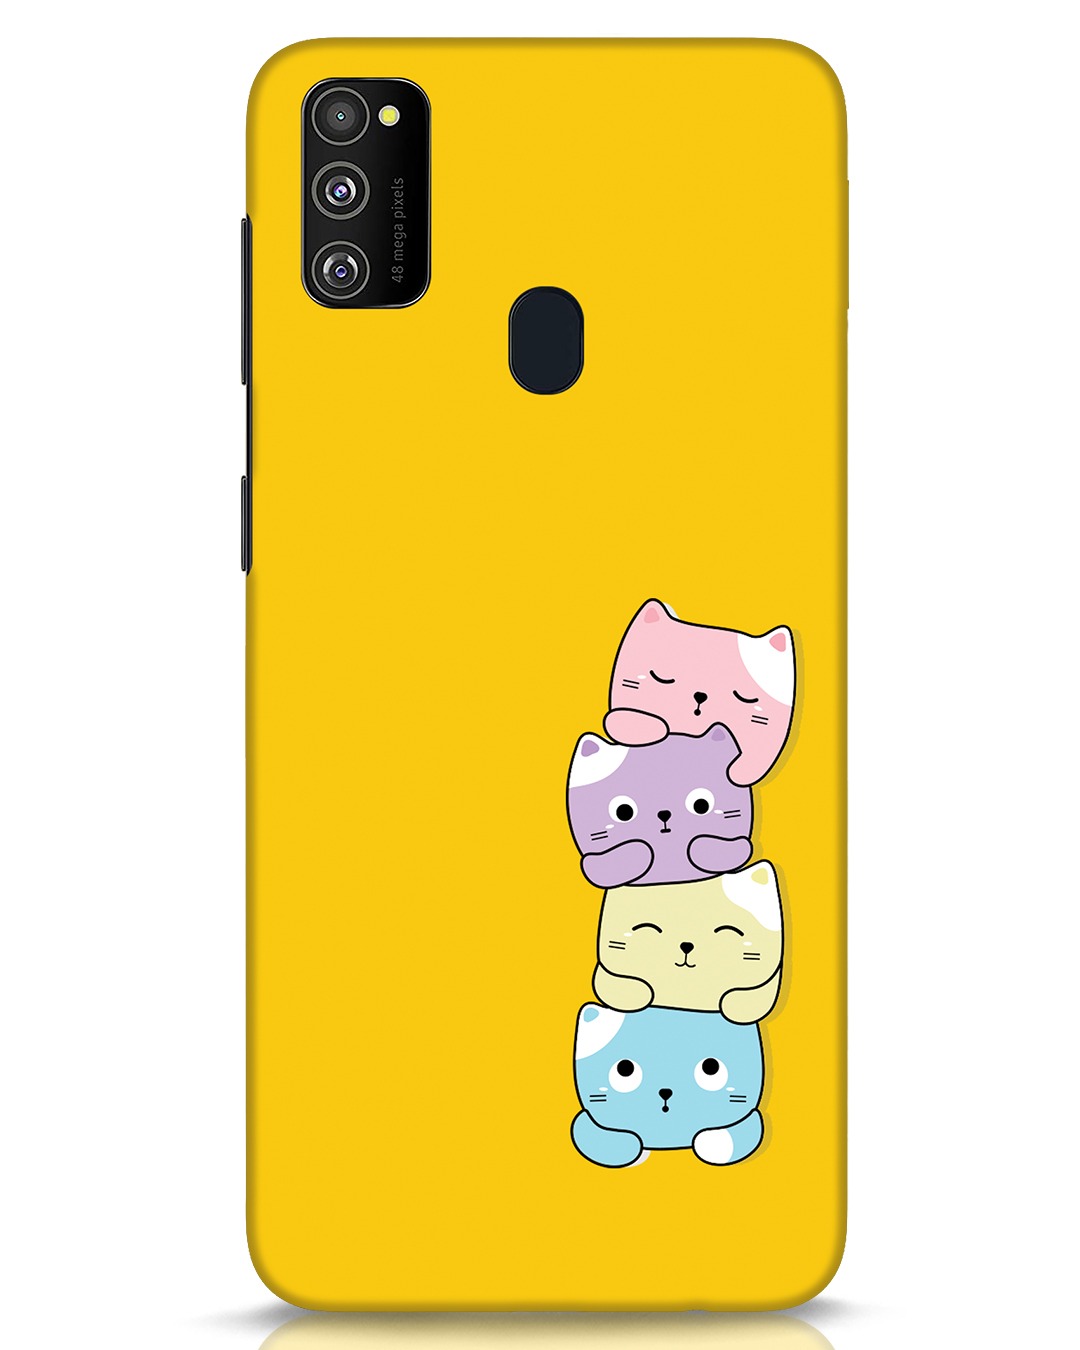 Buy Kitty Cats  Samsung Galaxy  M30s Mobile  Cover Mobile  